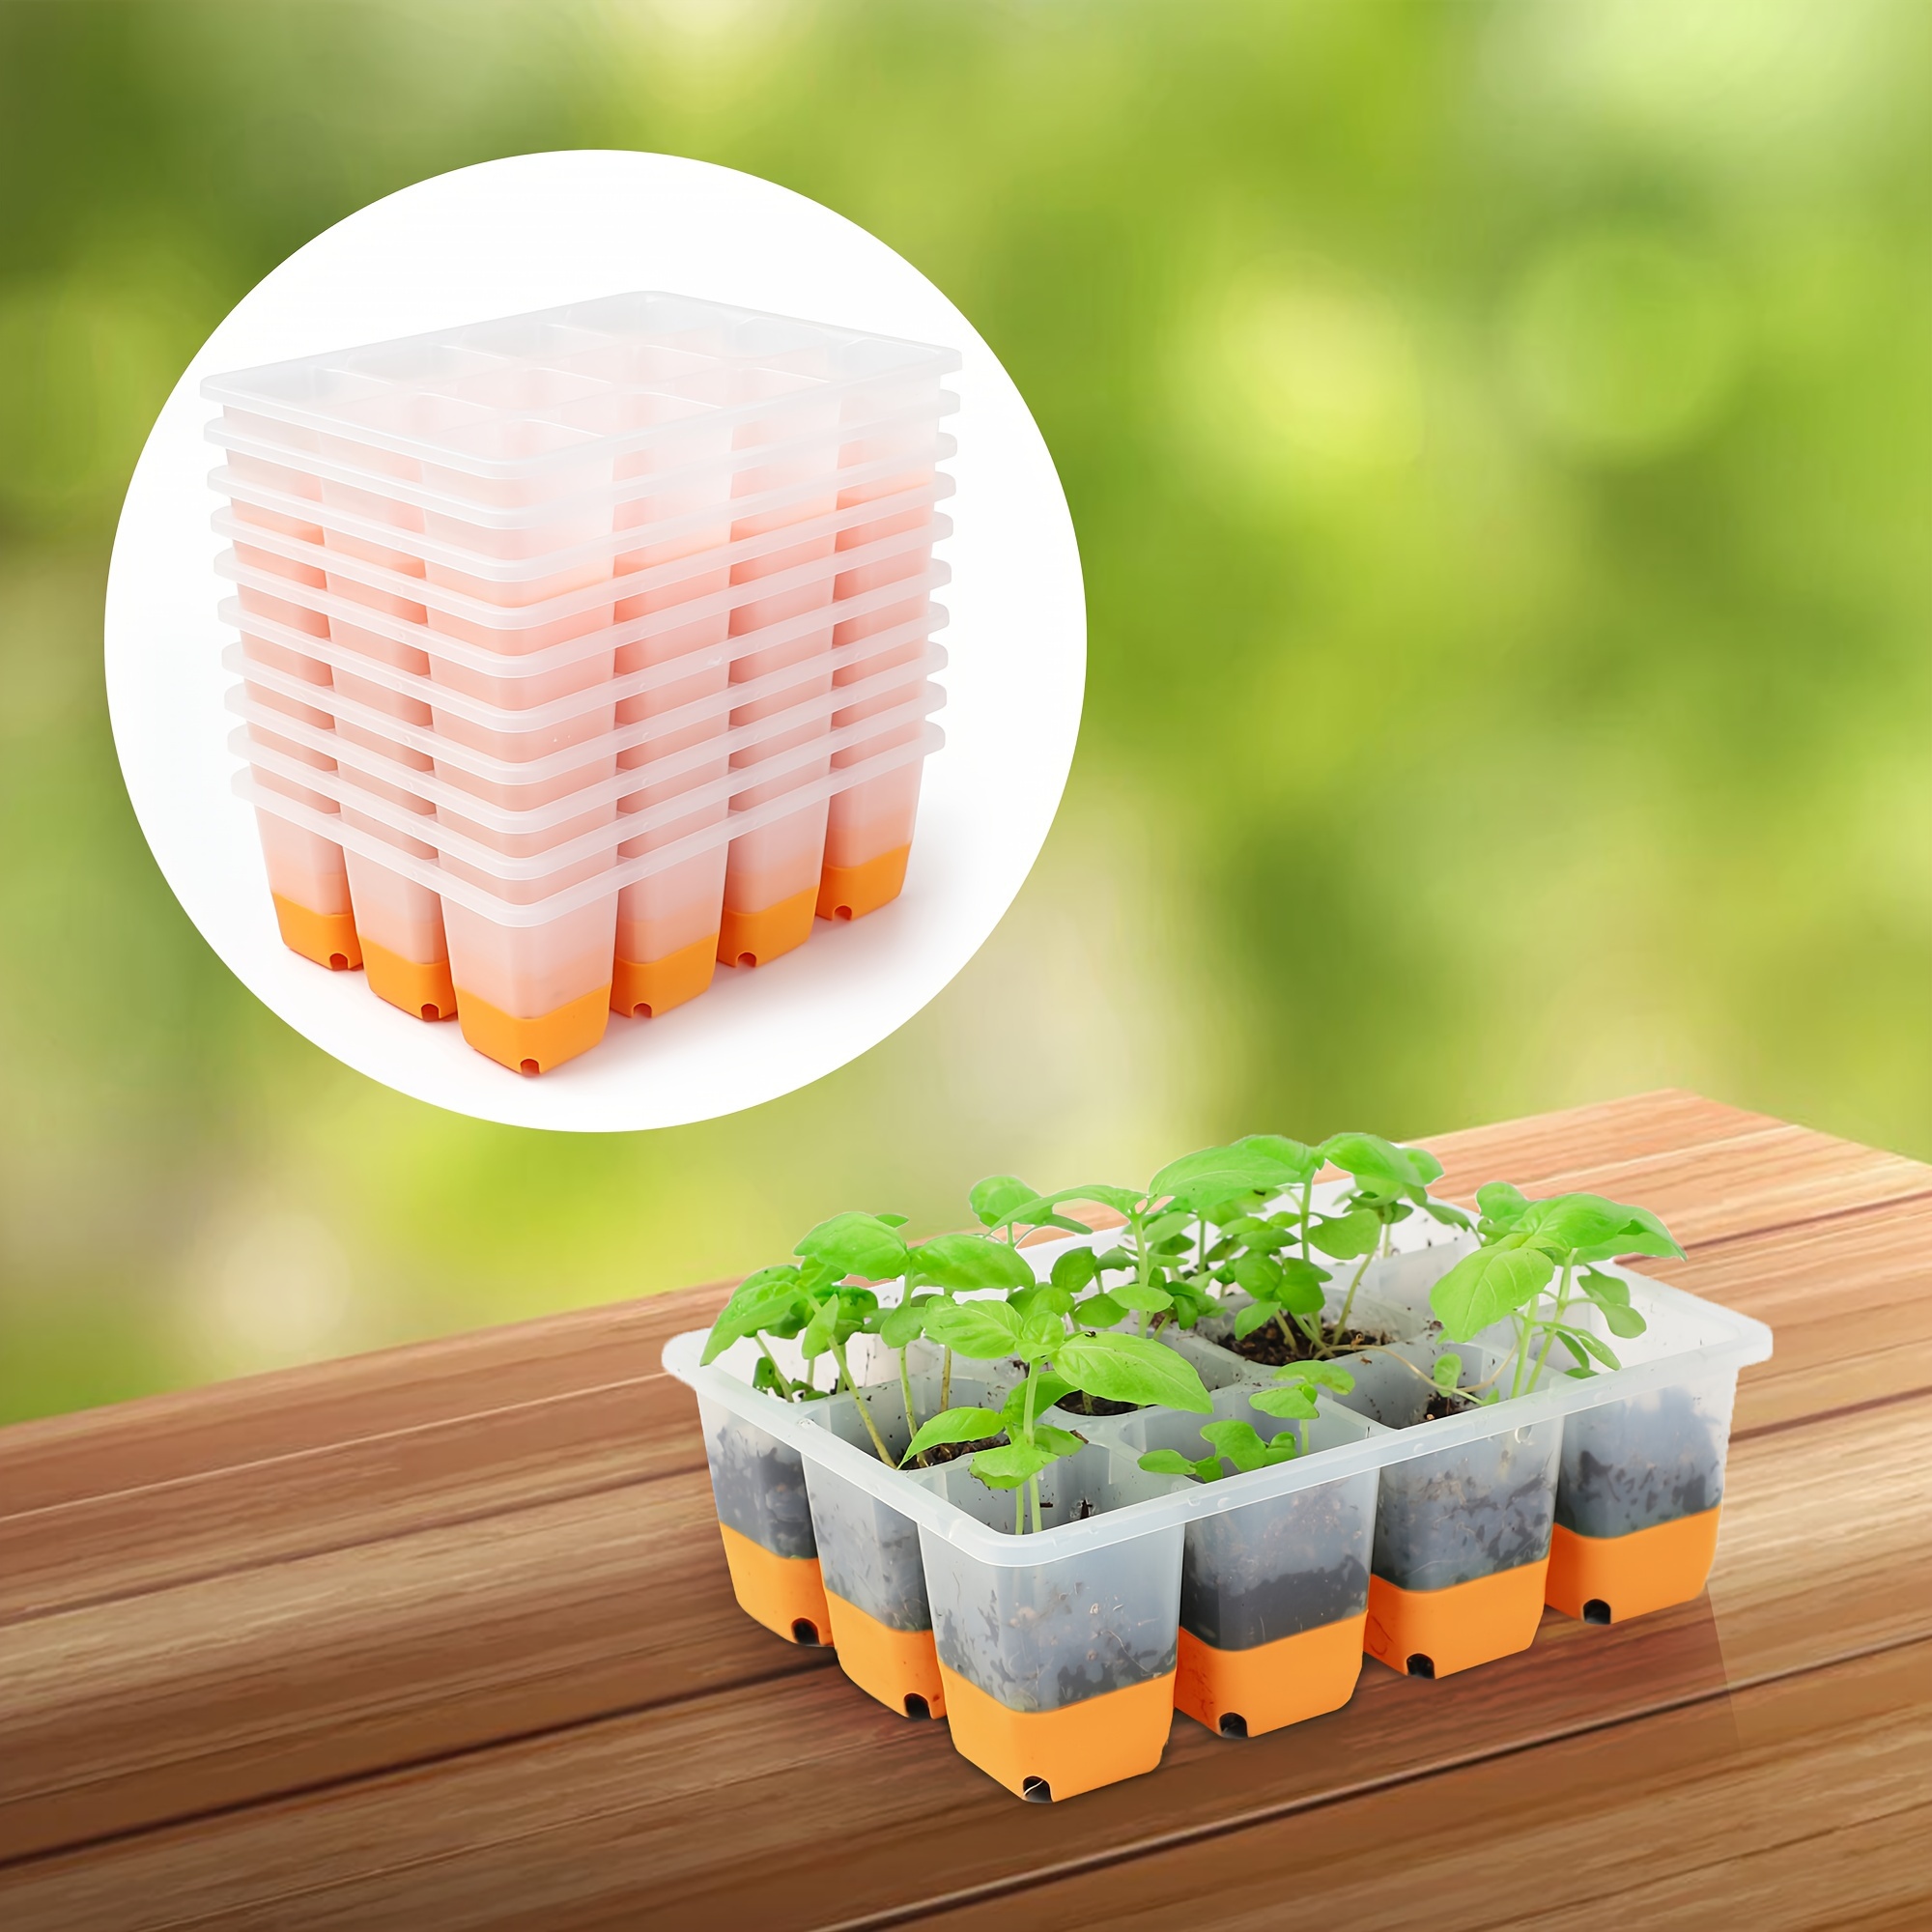 Silicone Sili-Seedlings® Tray 10-Cell